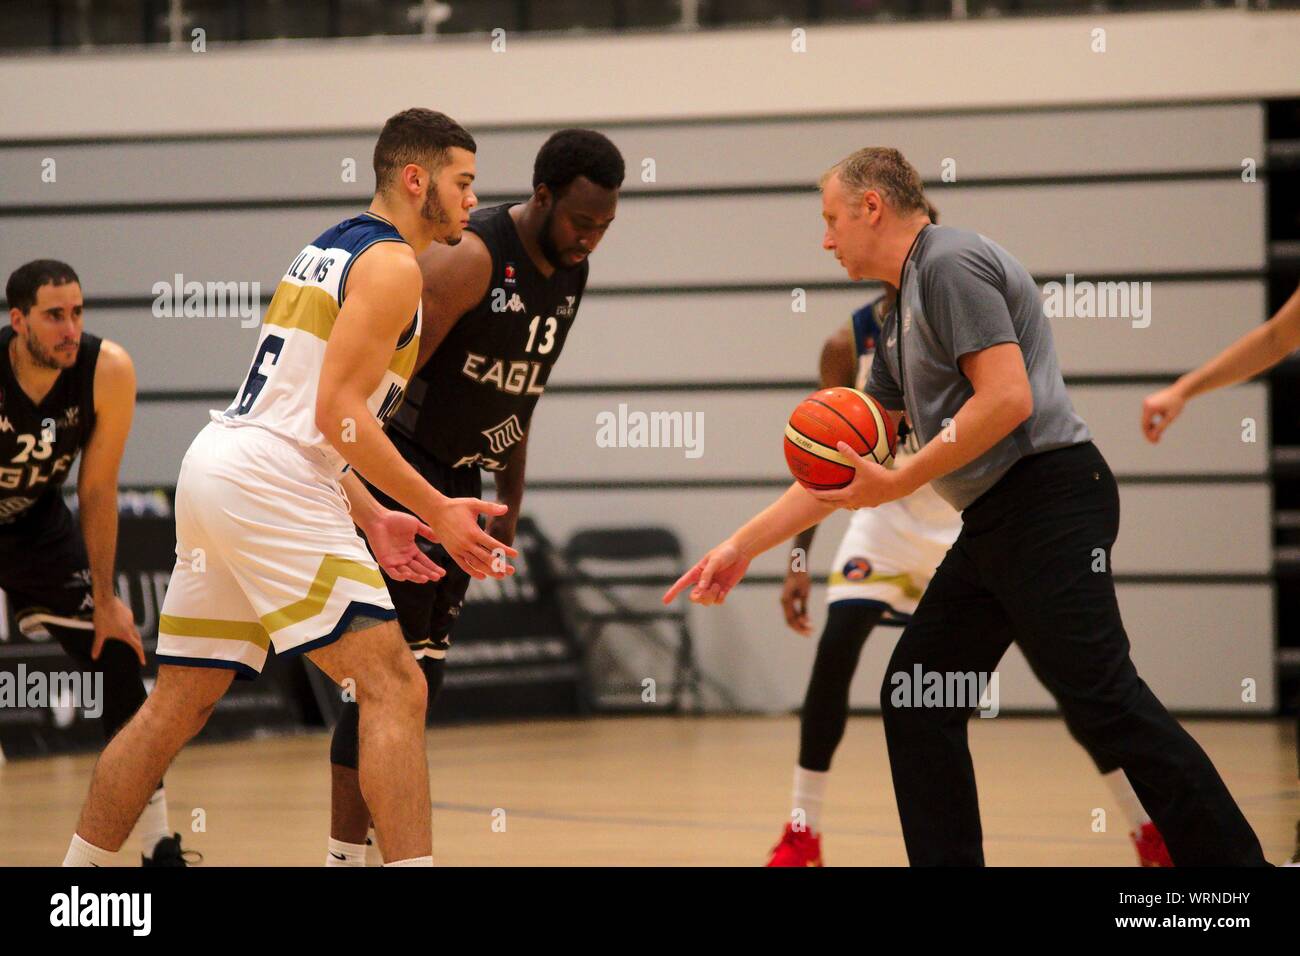 Newcastle upon Tyne, England, 6 September 2019. The referee pointing to the spot where the Newcastle Eagles player Darius Defoe should stand for the tip off against Jordon Williams of Worcester Wolves in their pre season basketball match at the Eagles Community Arena. Stock Photo